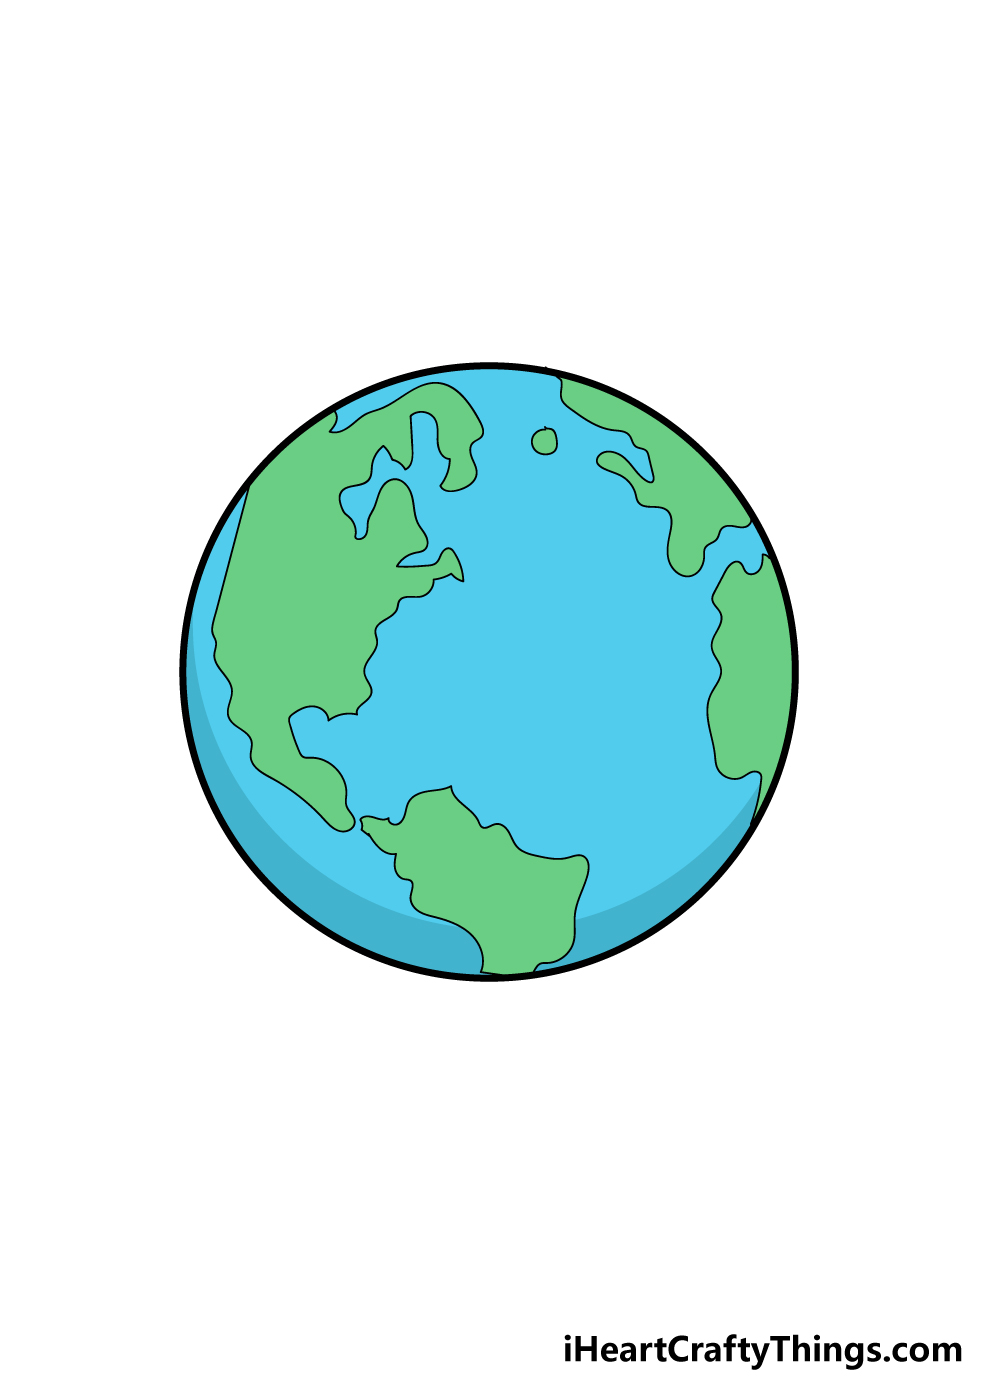 Earth Drawing - How To Draw The Earth Step By Step